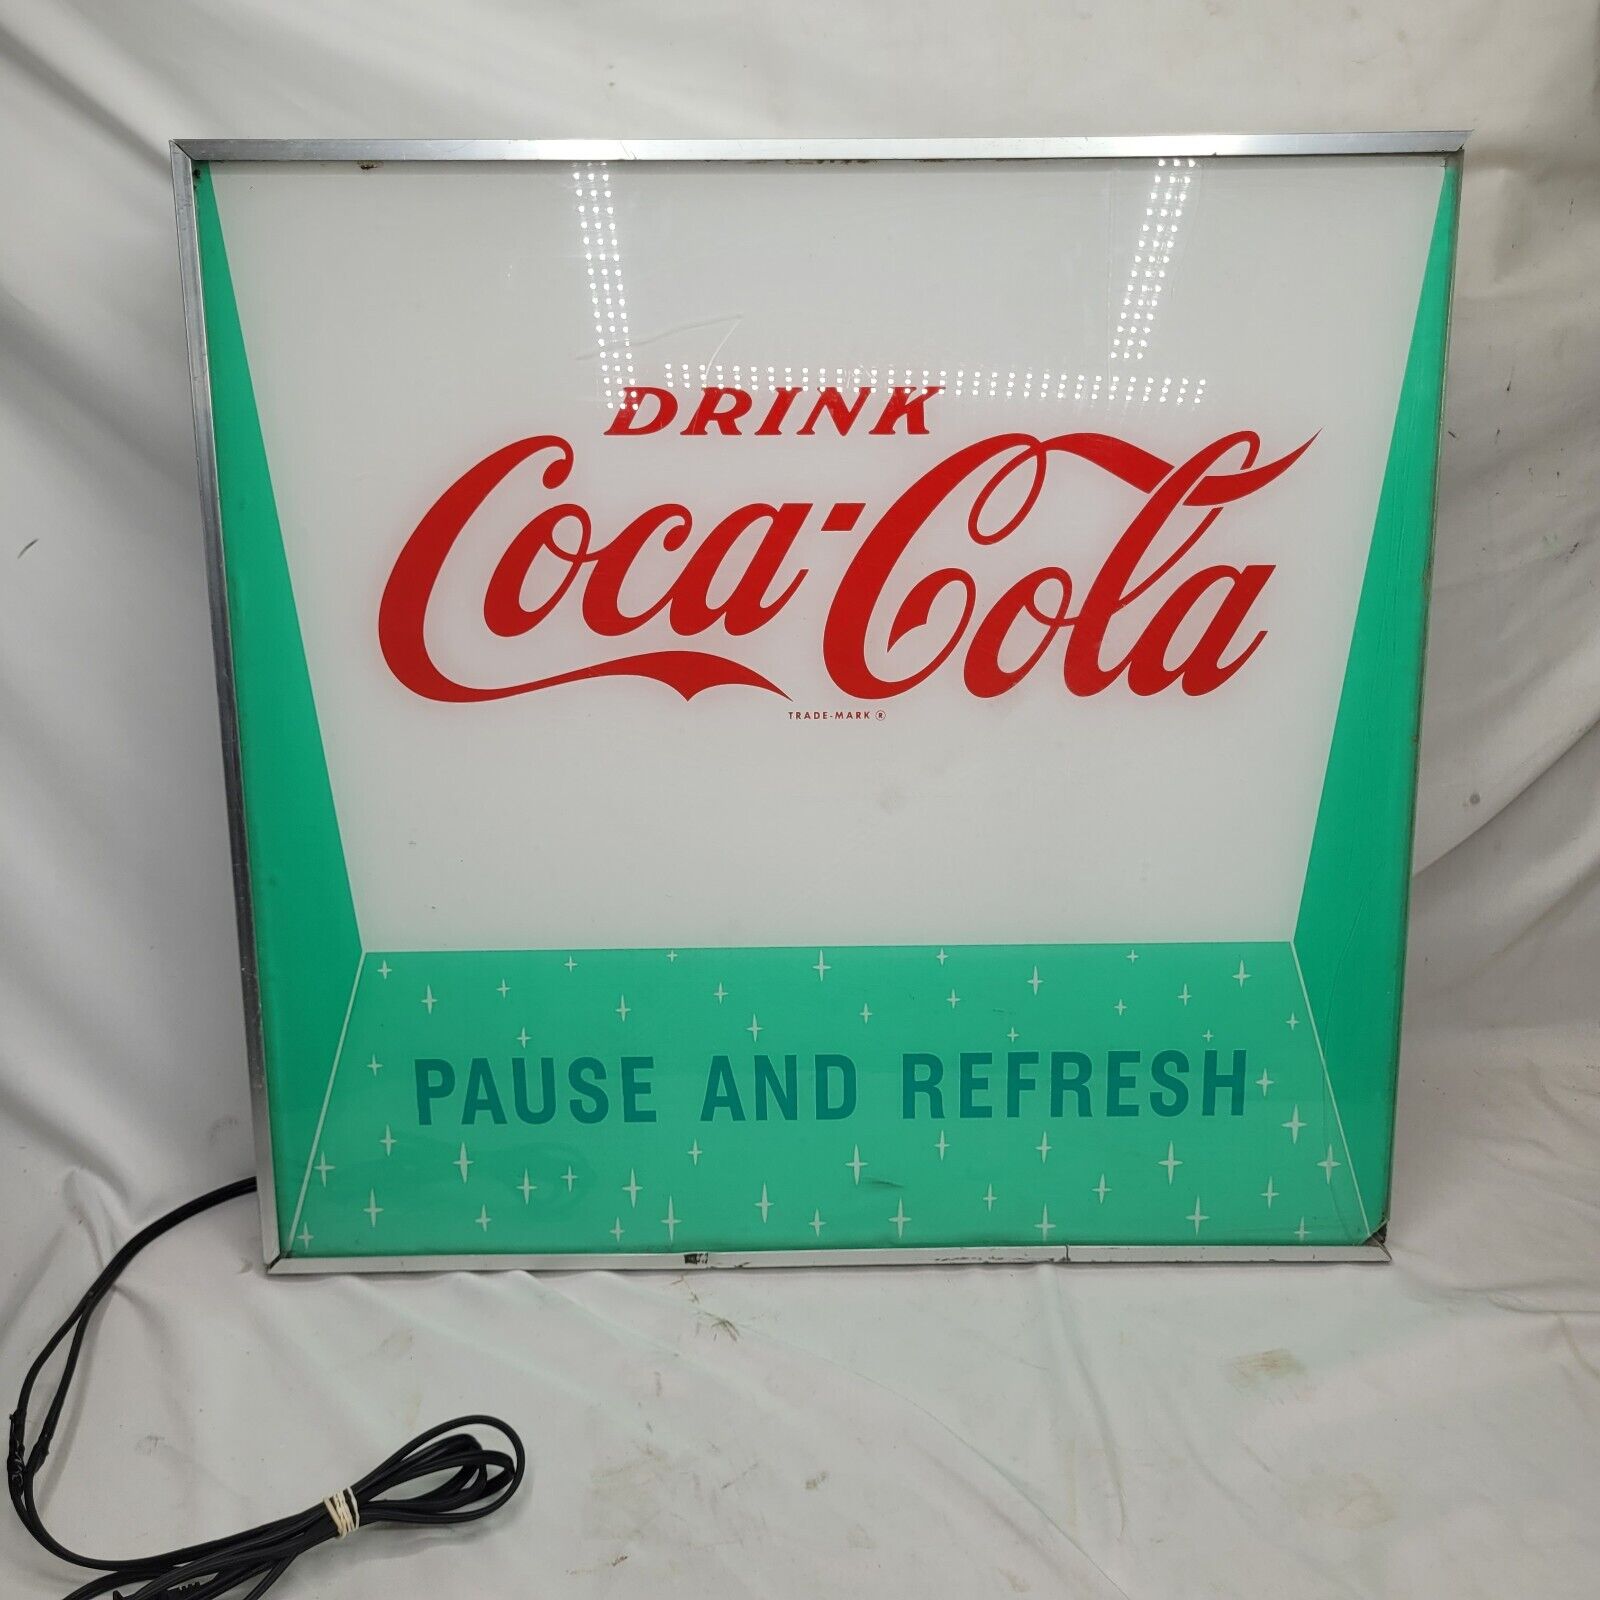 Price Brothers Coca-Cola Illuminated Sign Pause and Refresh Original SEE INFO